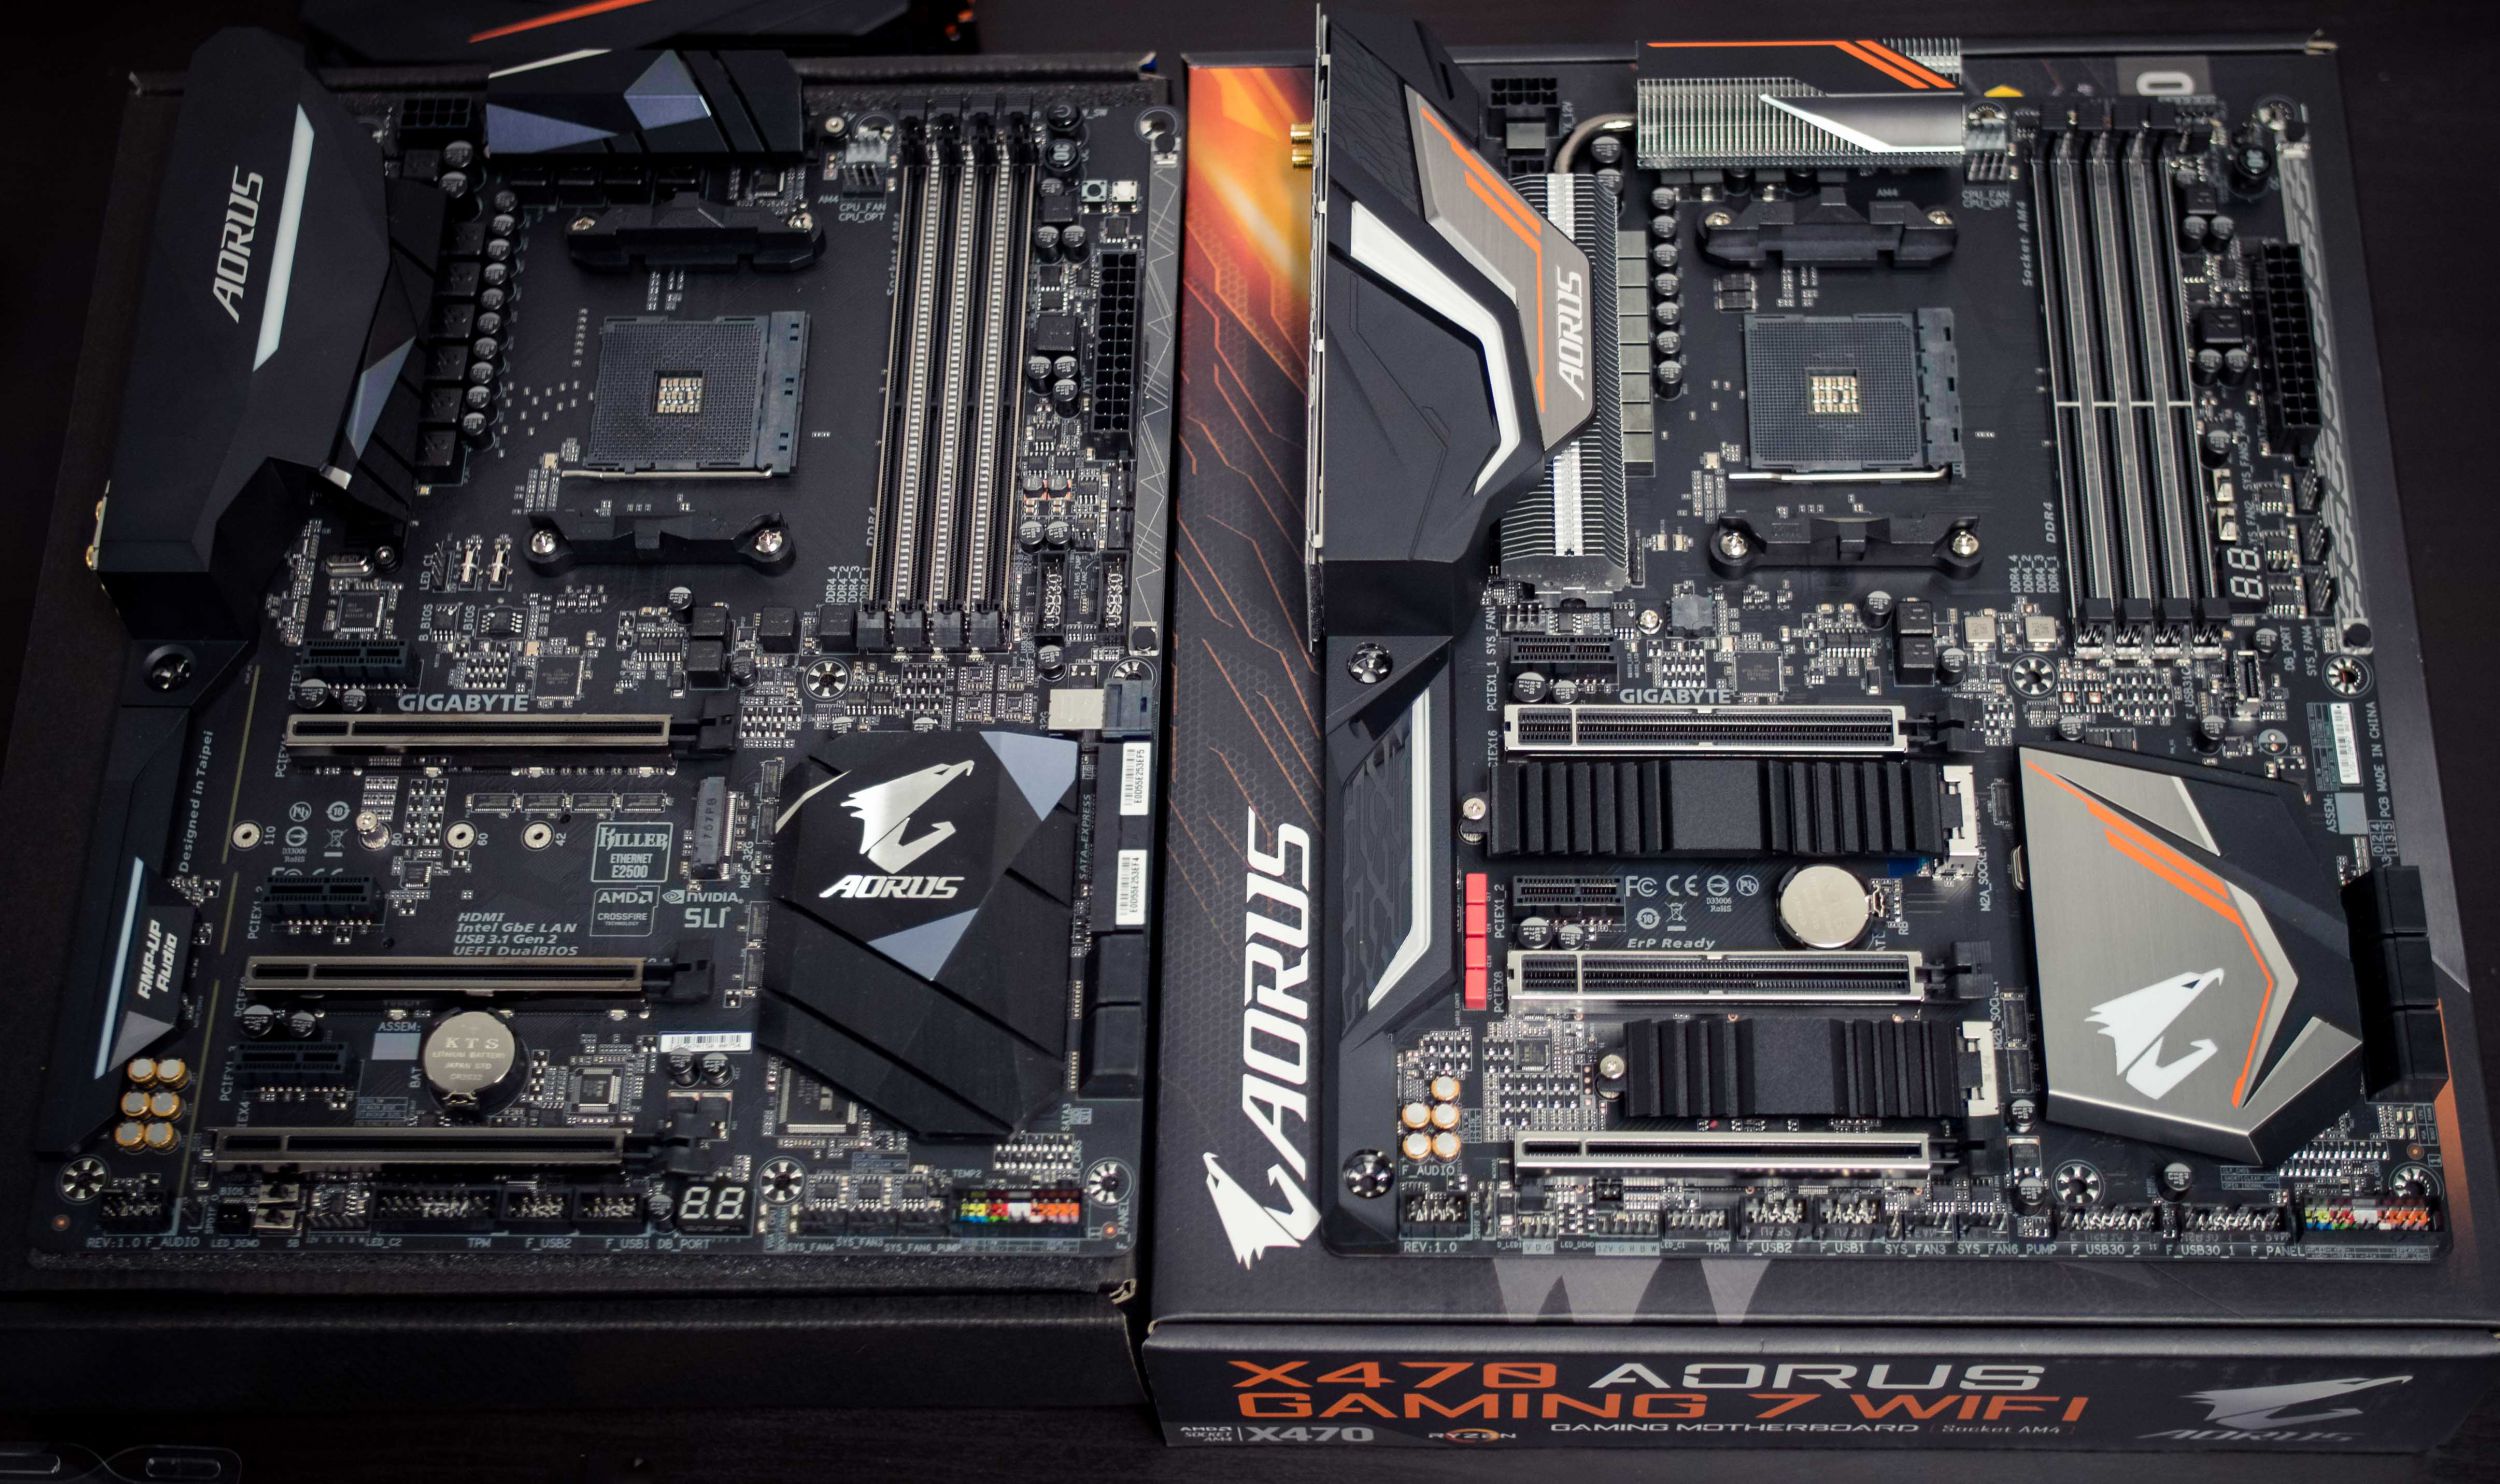 Compared to the previous generation, the X470 AORUS Gaming 7 rocks a bigger and better heat sink.